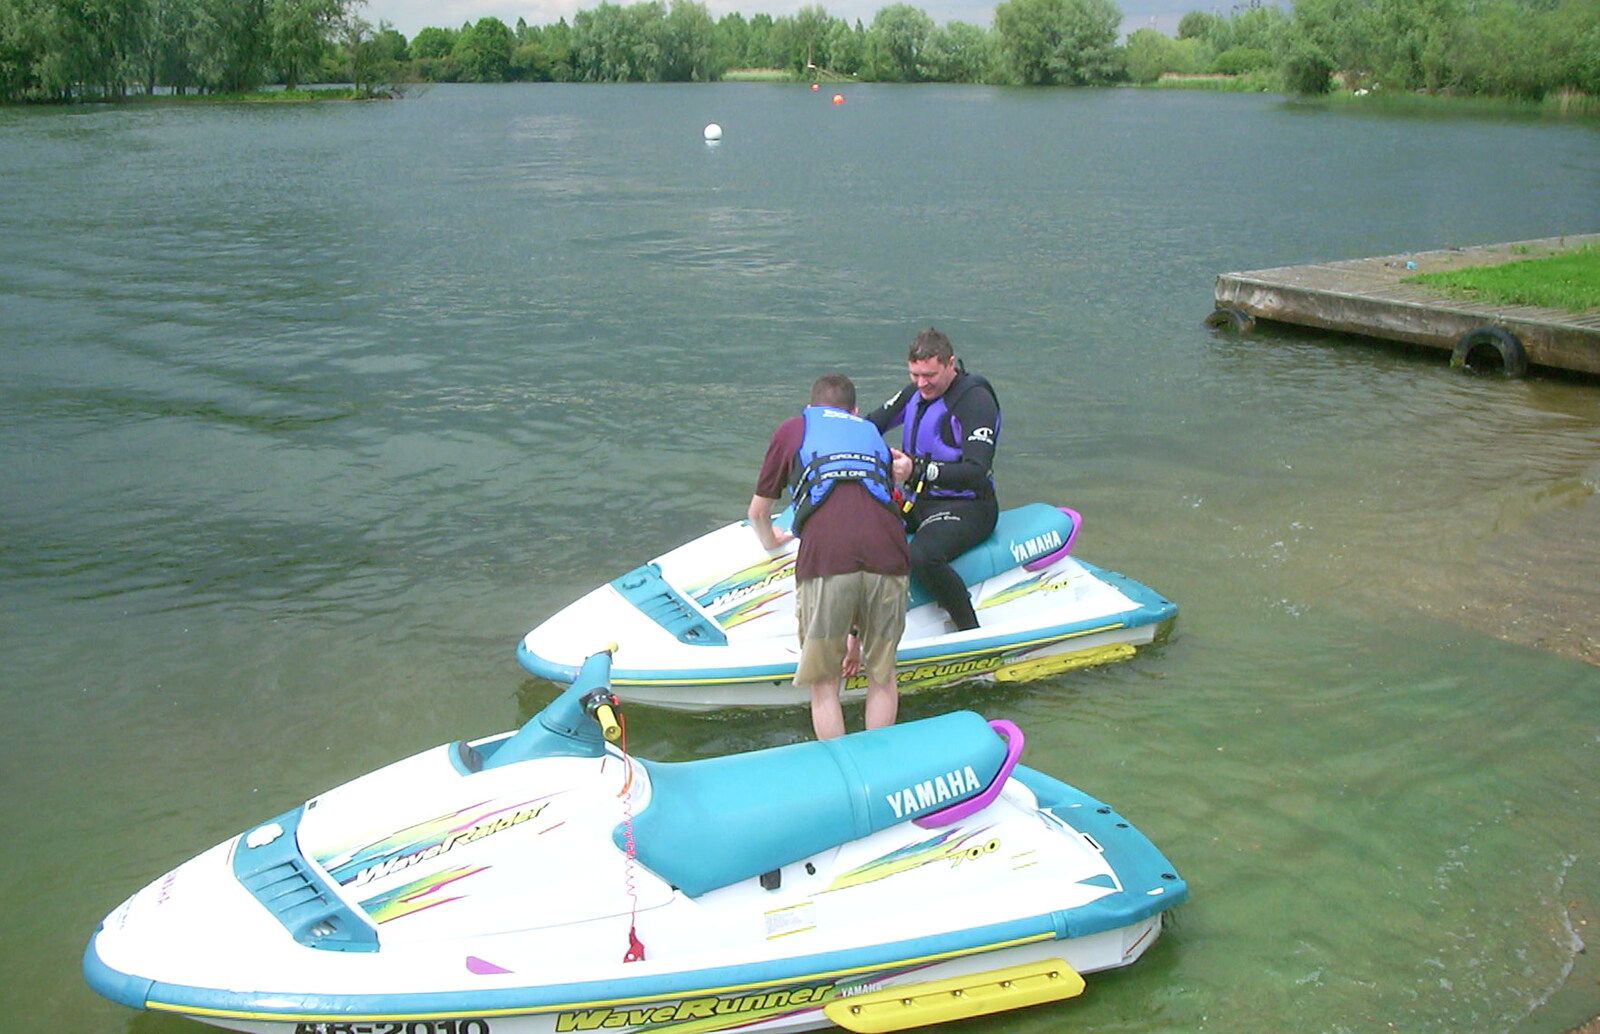 3G Lab Watersports Fun Day, Wyboston, Bedfordshire - 8th June 2002: Jet boats are ready